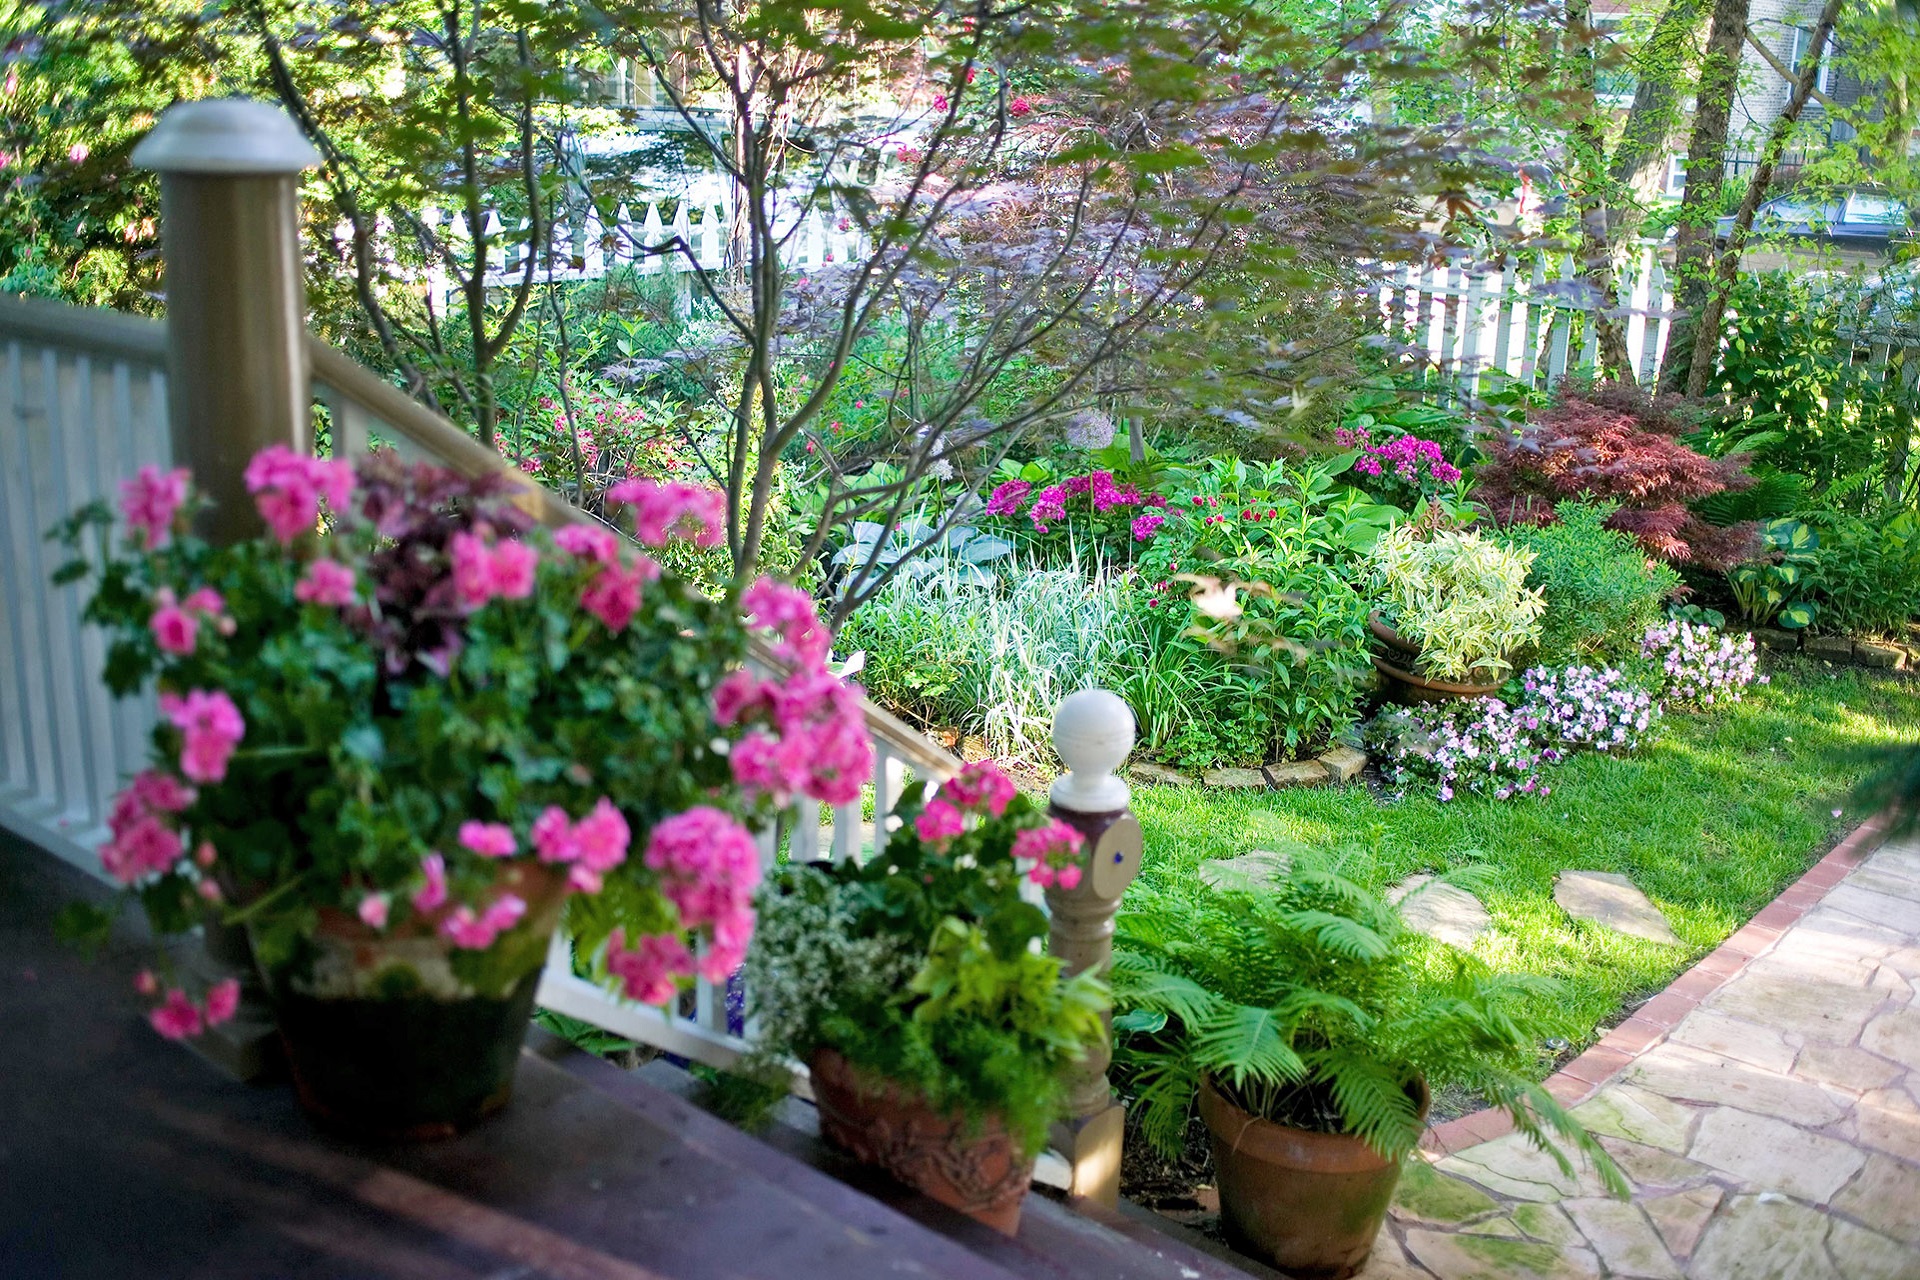 How To Keep Your Garden Healthily?